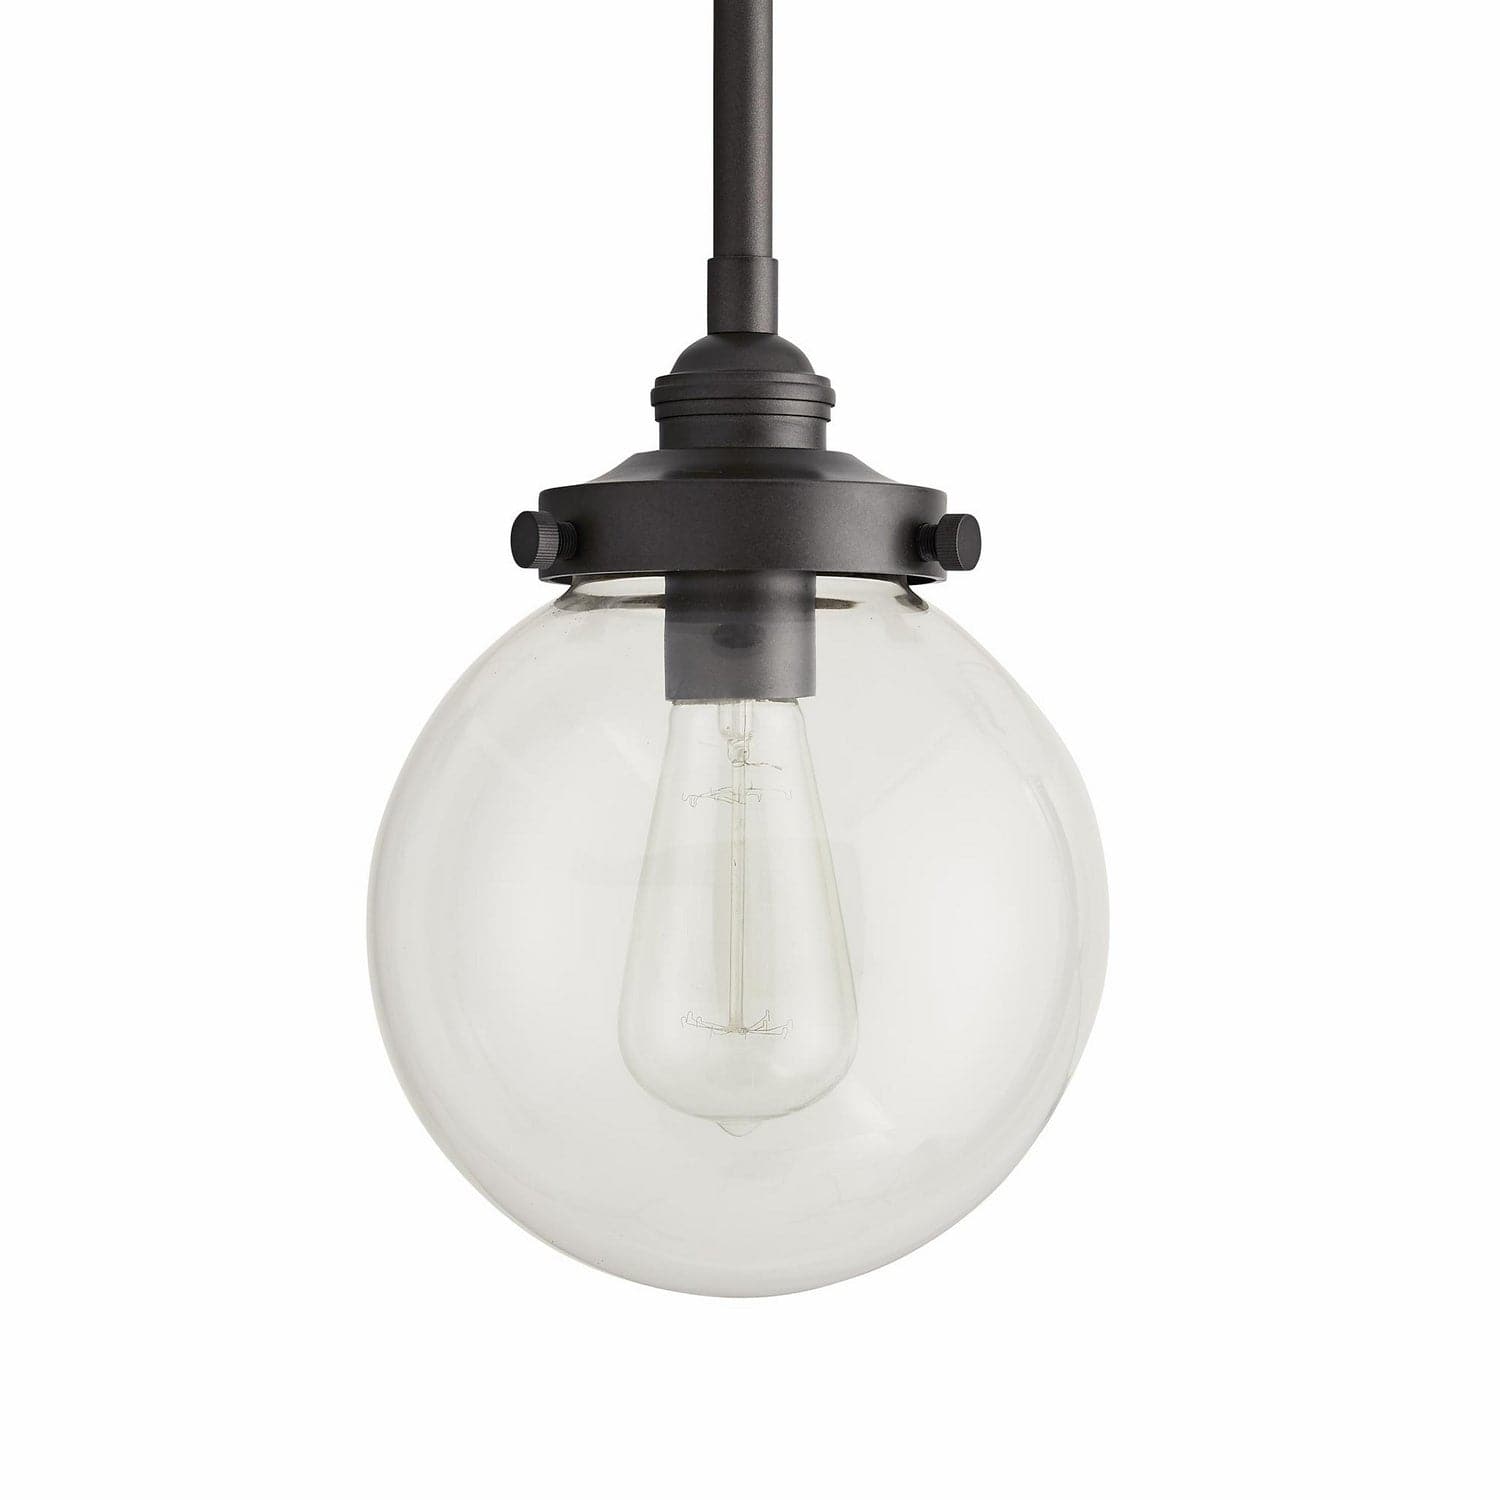 Arteriors - 49210 - One Light Outdoor Pendant - Reeves - Aged Iron